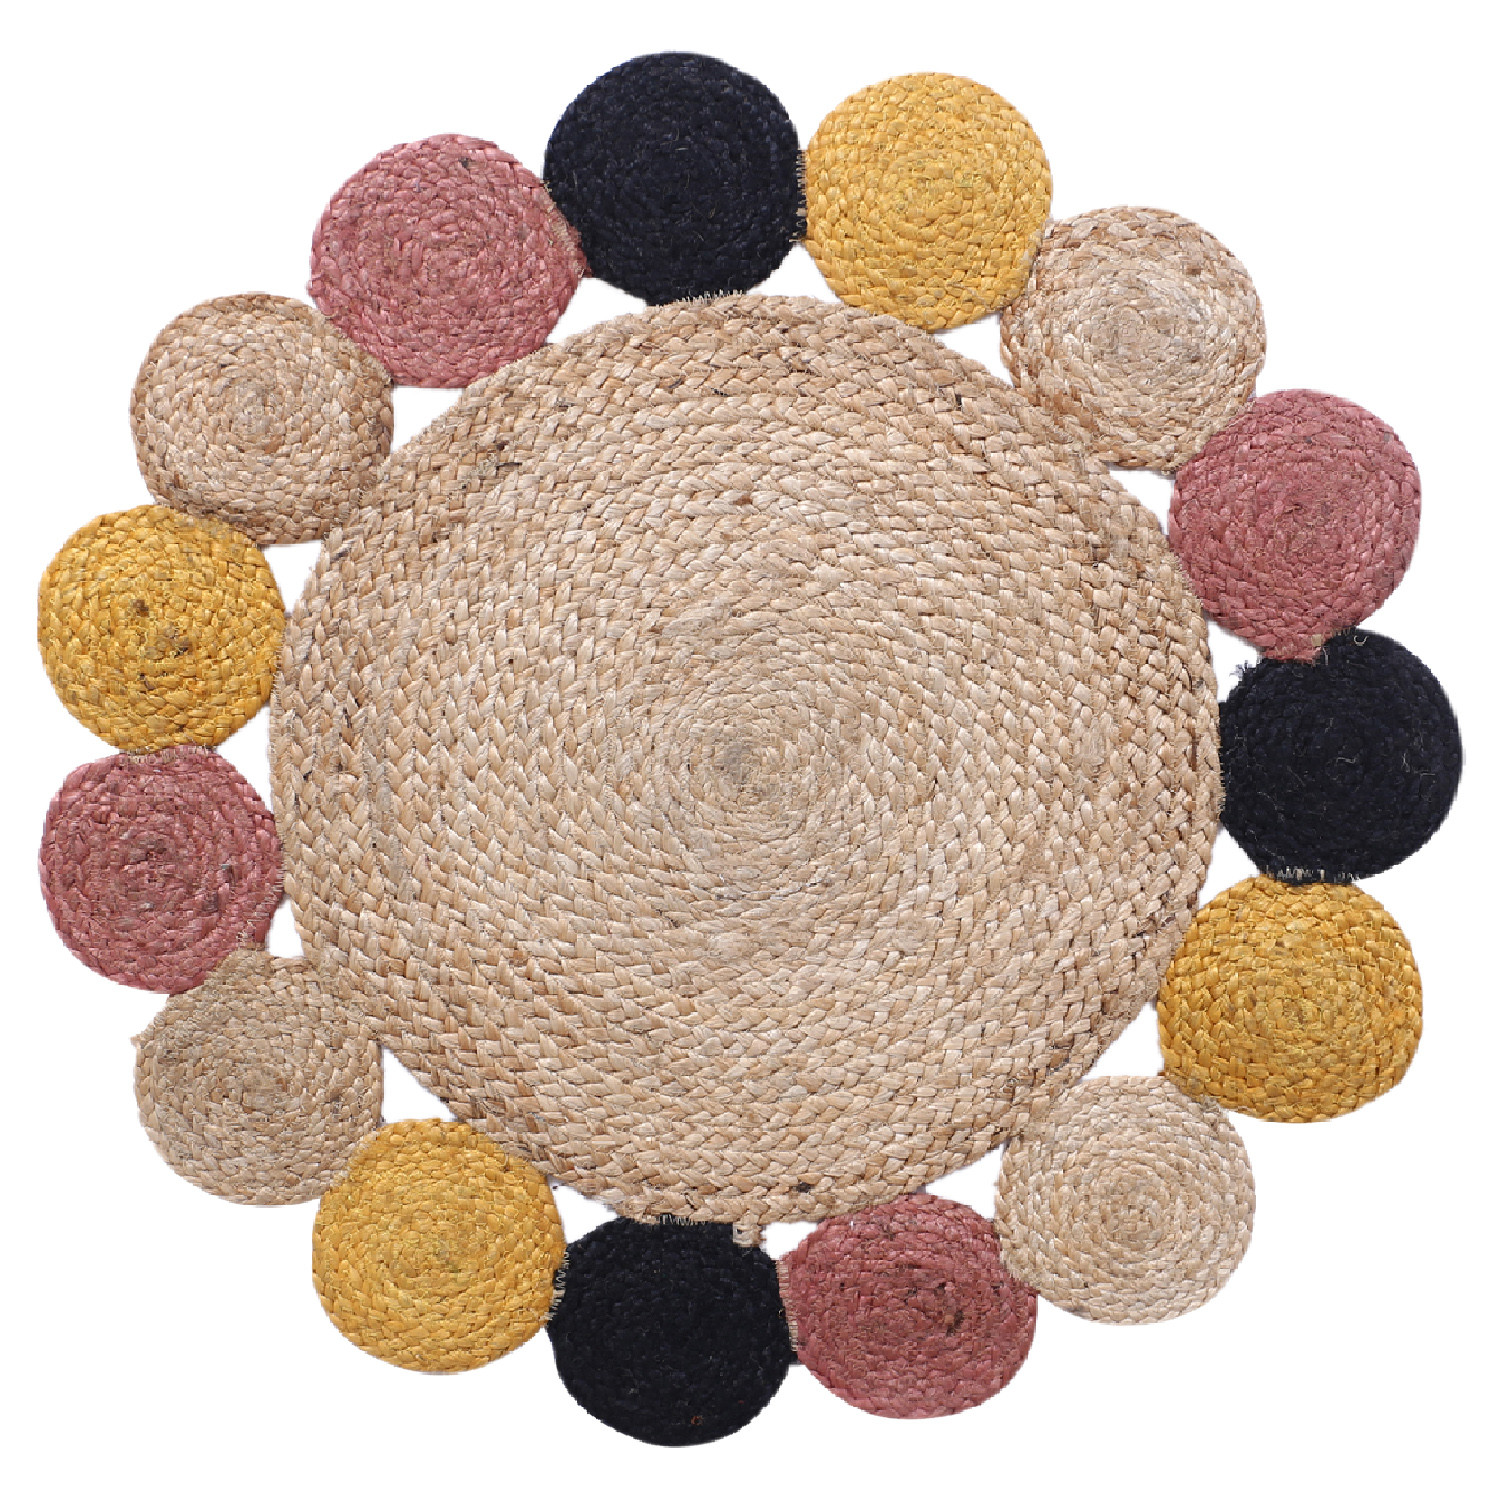 Kuber Industries Hand Woven Carpet Rugs|Natural Solid Braided Jute Door mat|Multicolor Circle Border For Bedroom,Living Room,Dining Room,Yoga,74x74 cm,(Brown)